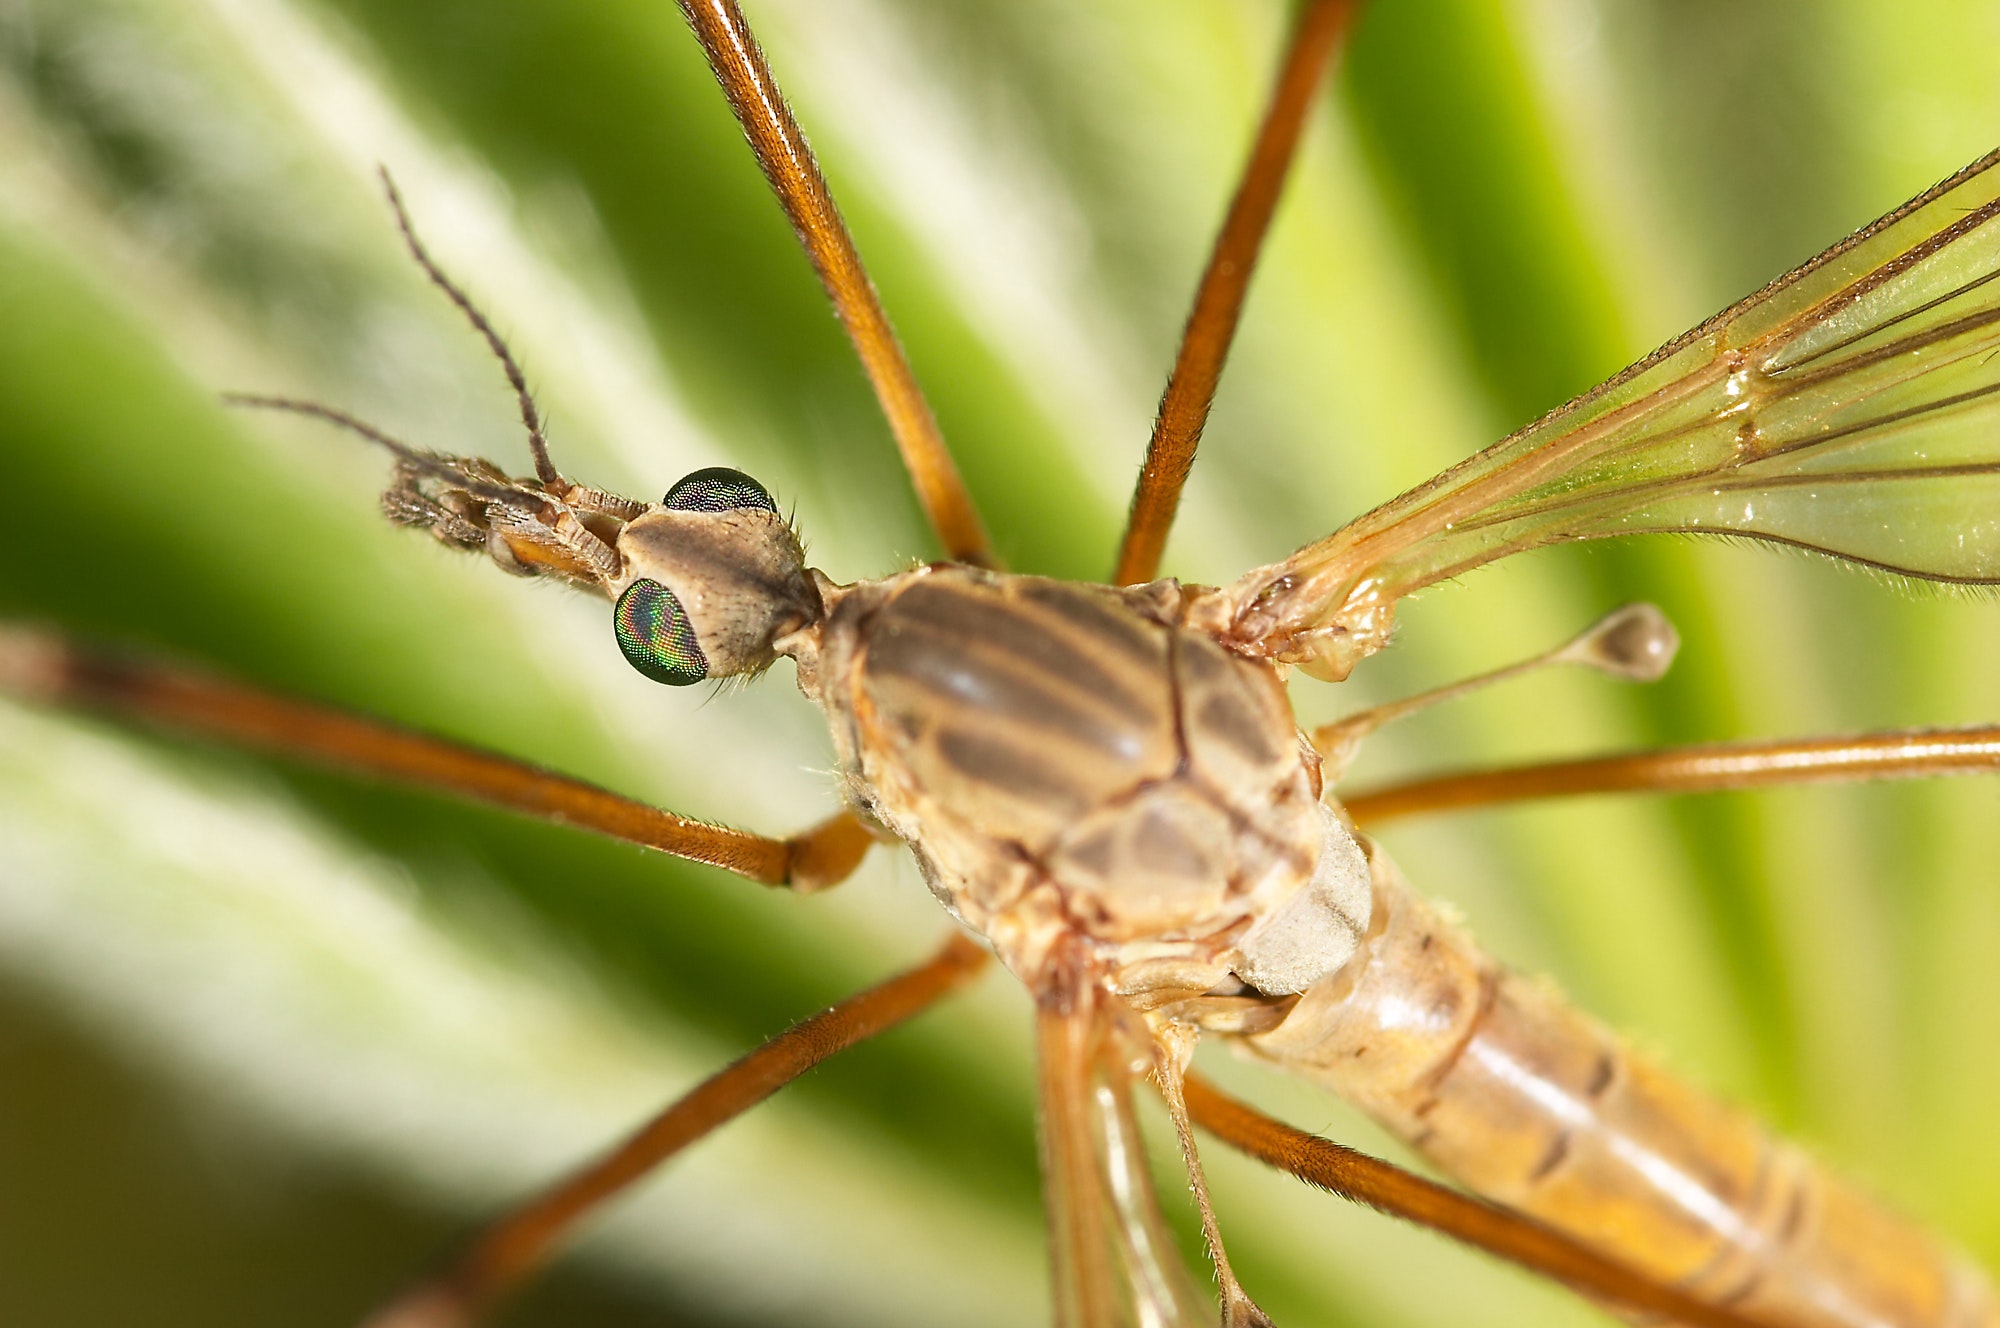 Are daddy long leg spiders poisonous? — Hailey’s student essay